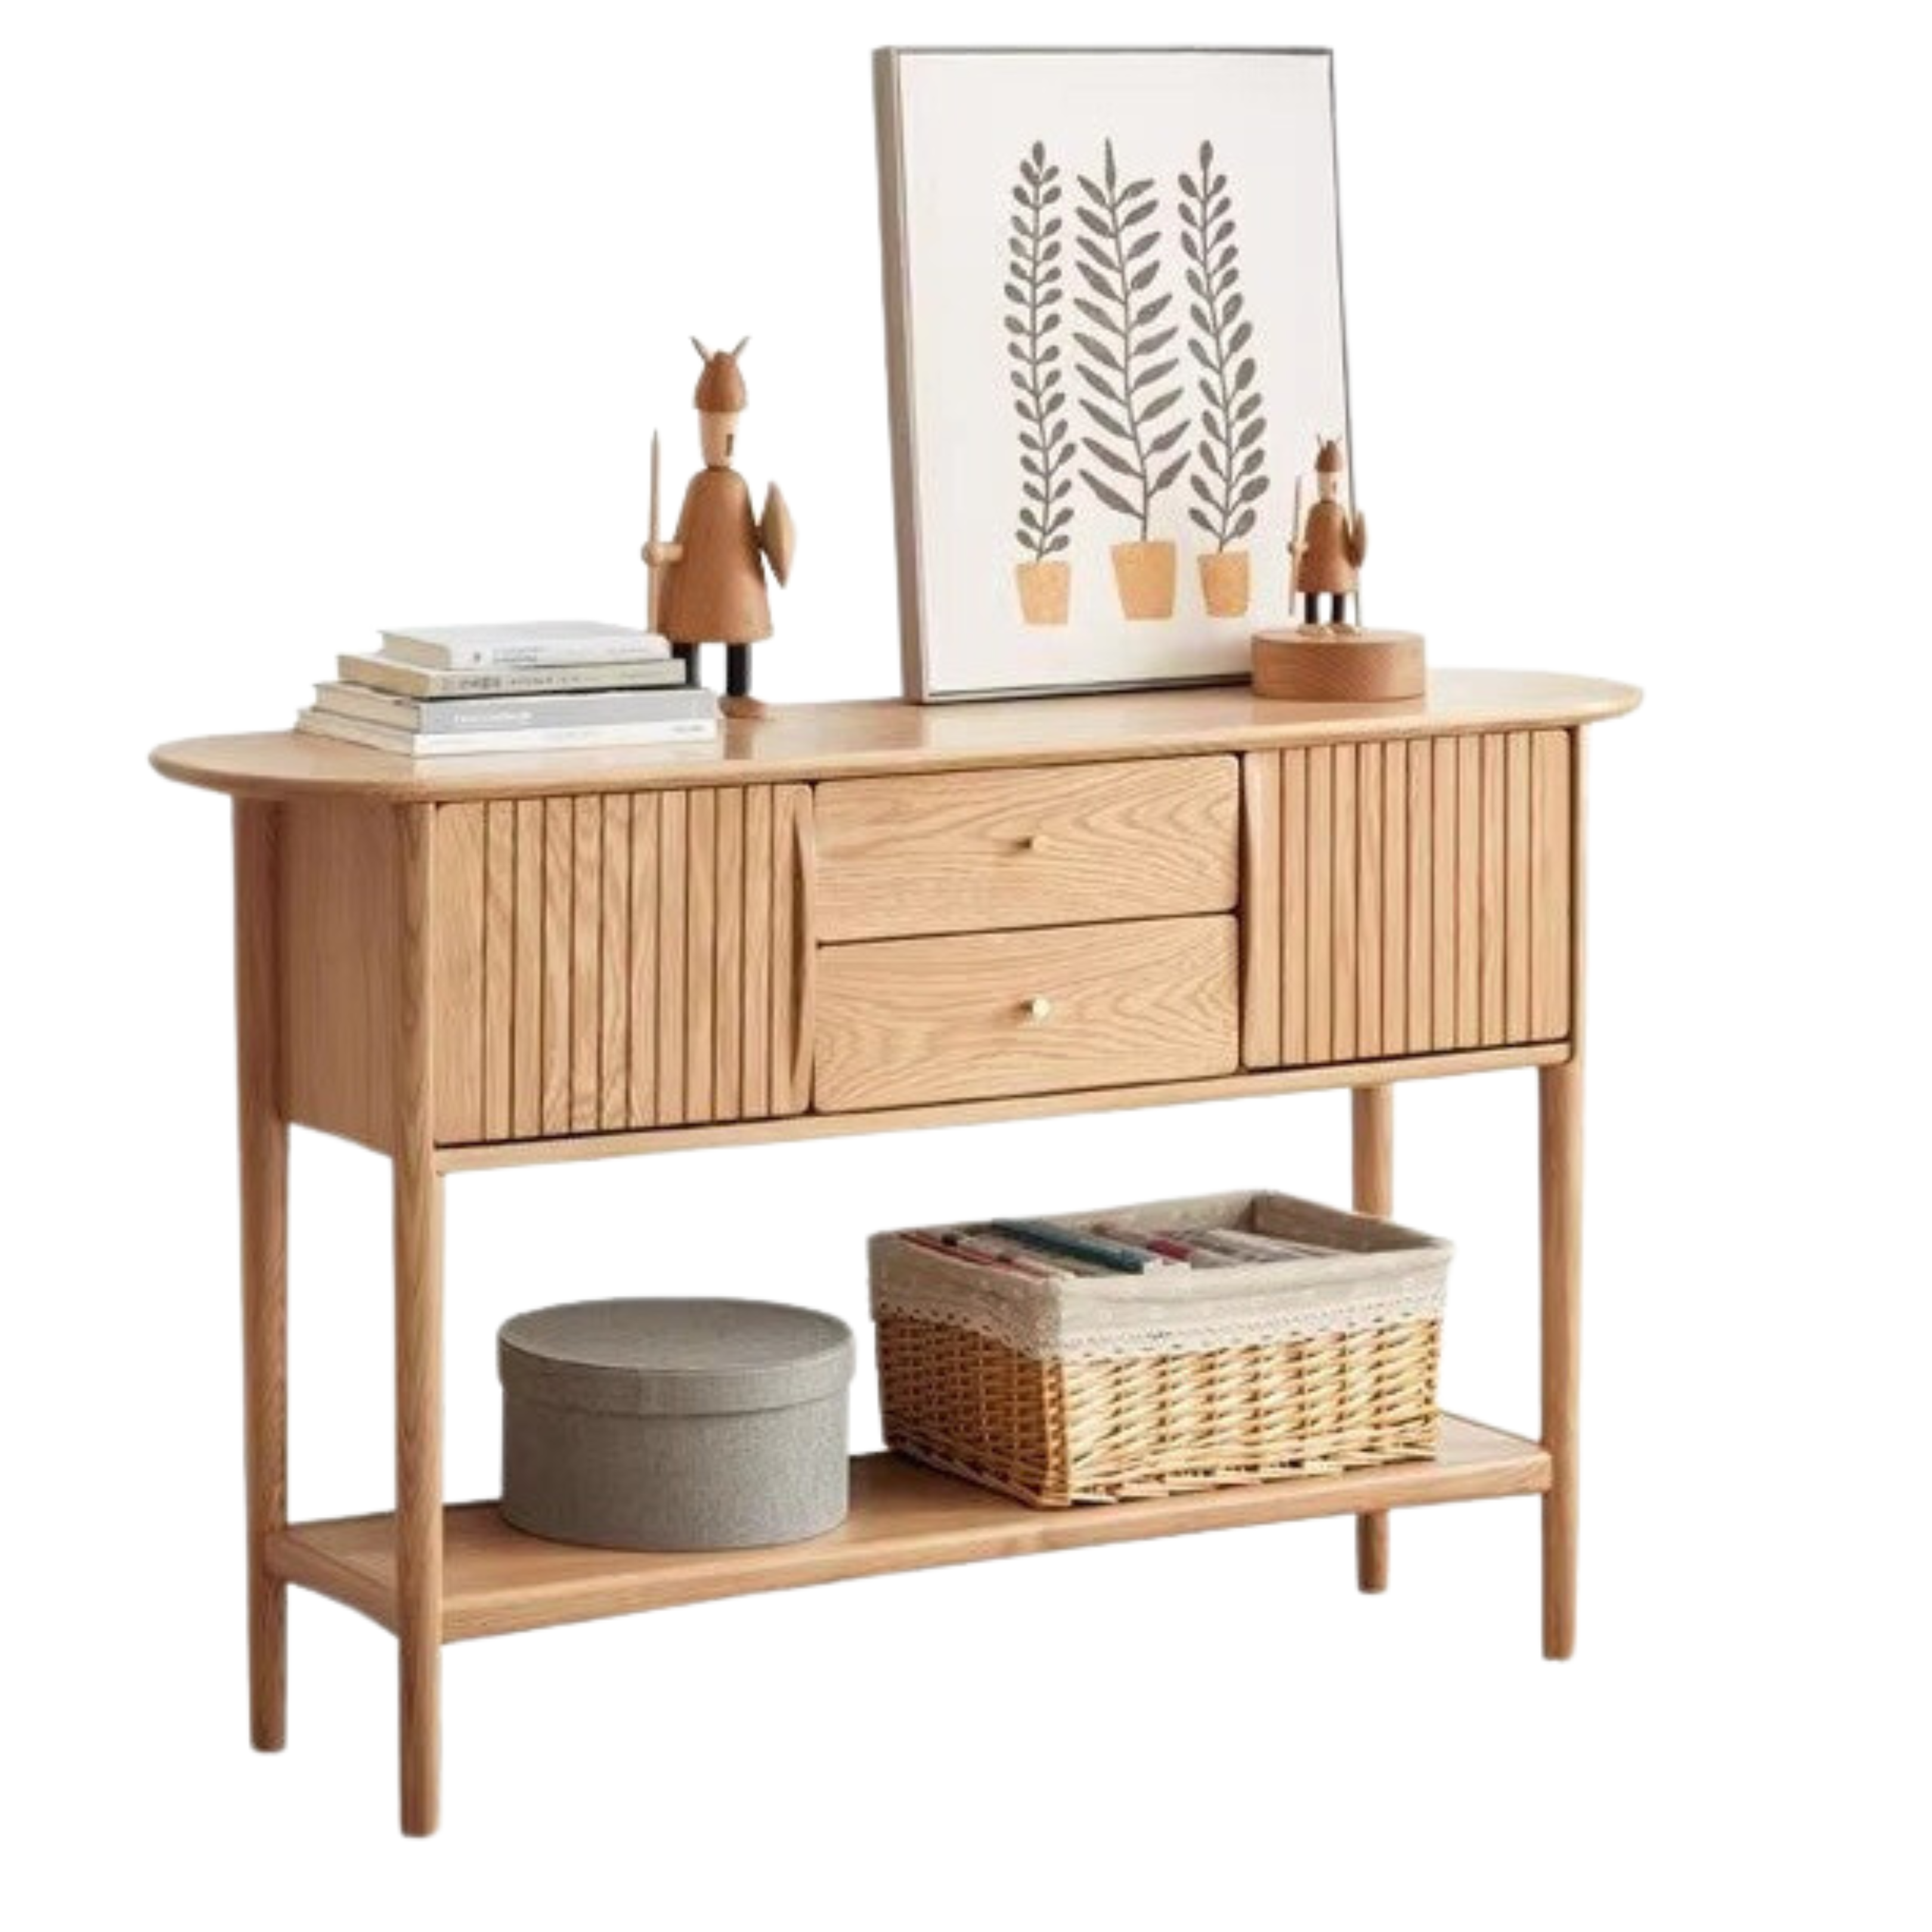 Oak solid wood console table